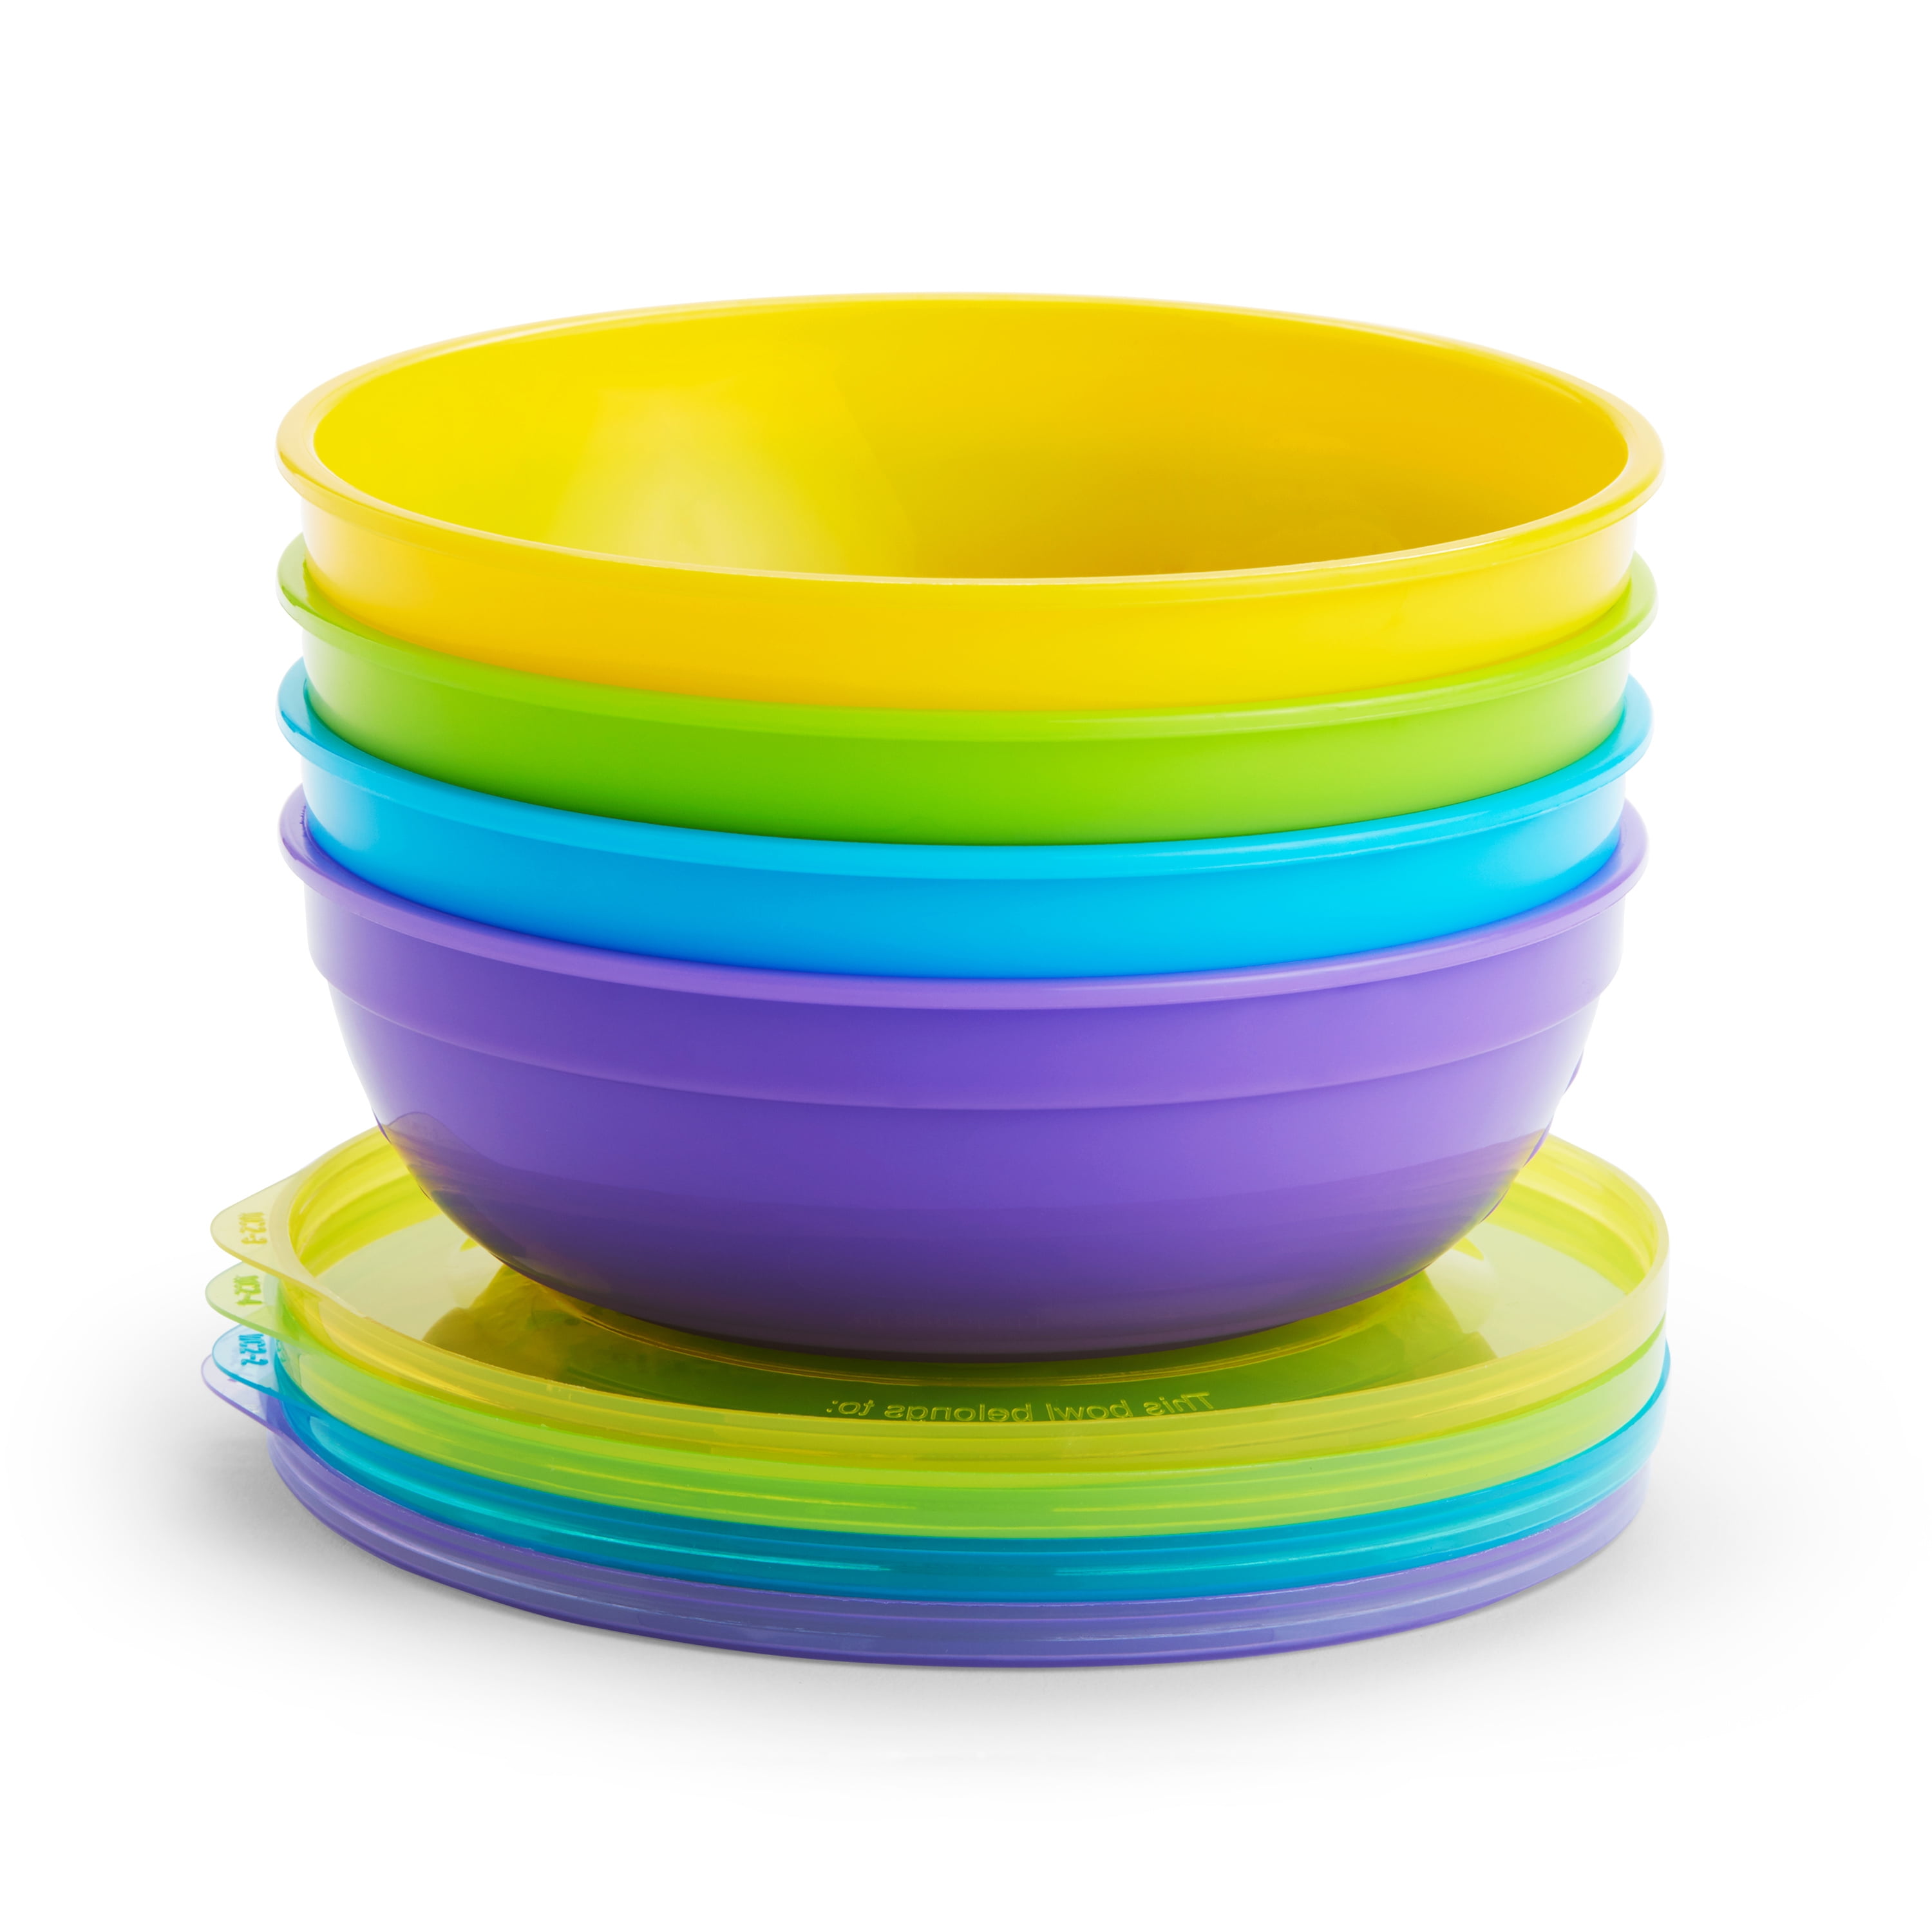 Munchkin Love-A-Bowls 10 Piece Dining Set, BPA-Free, Multi-Color